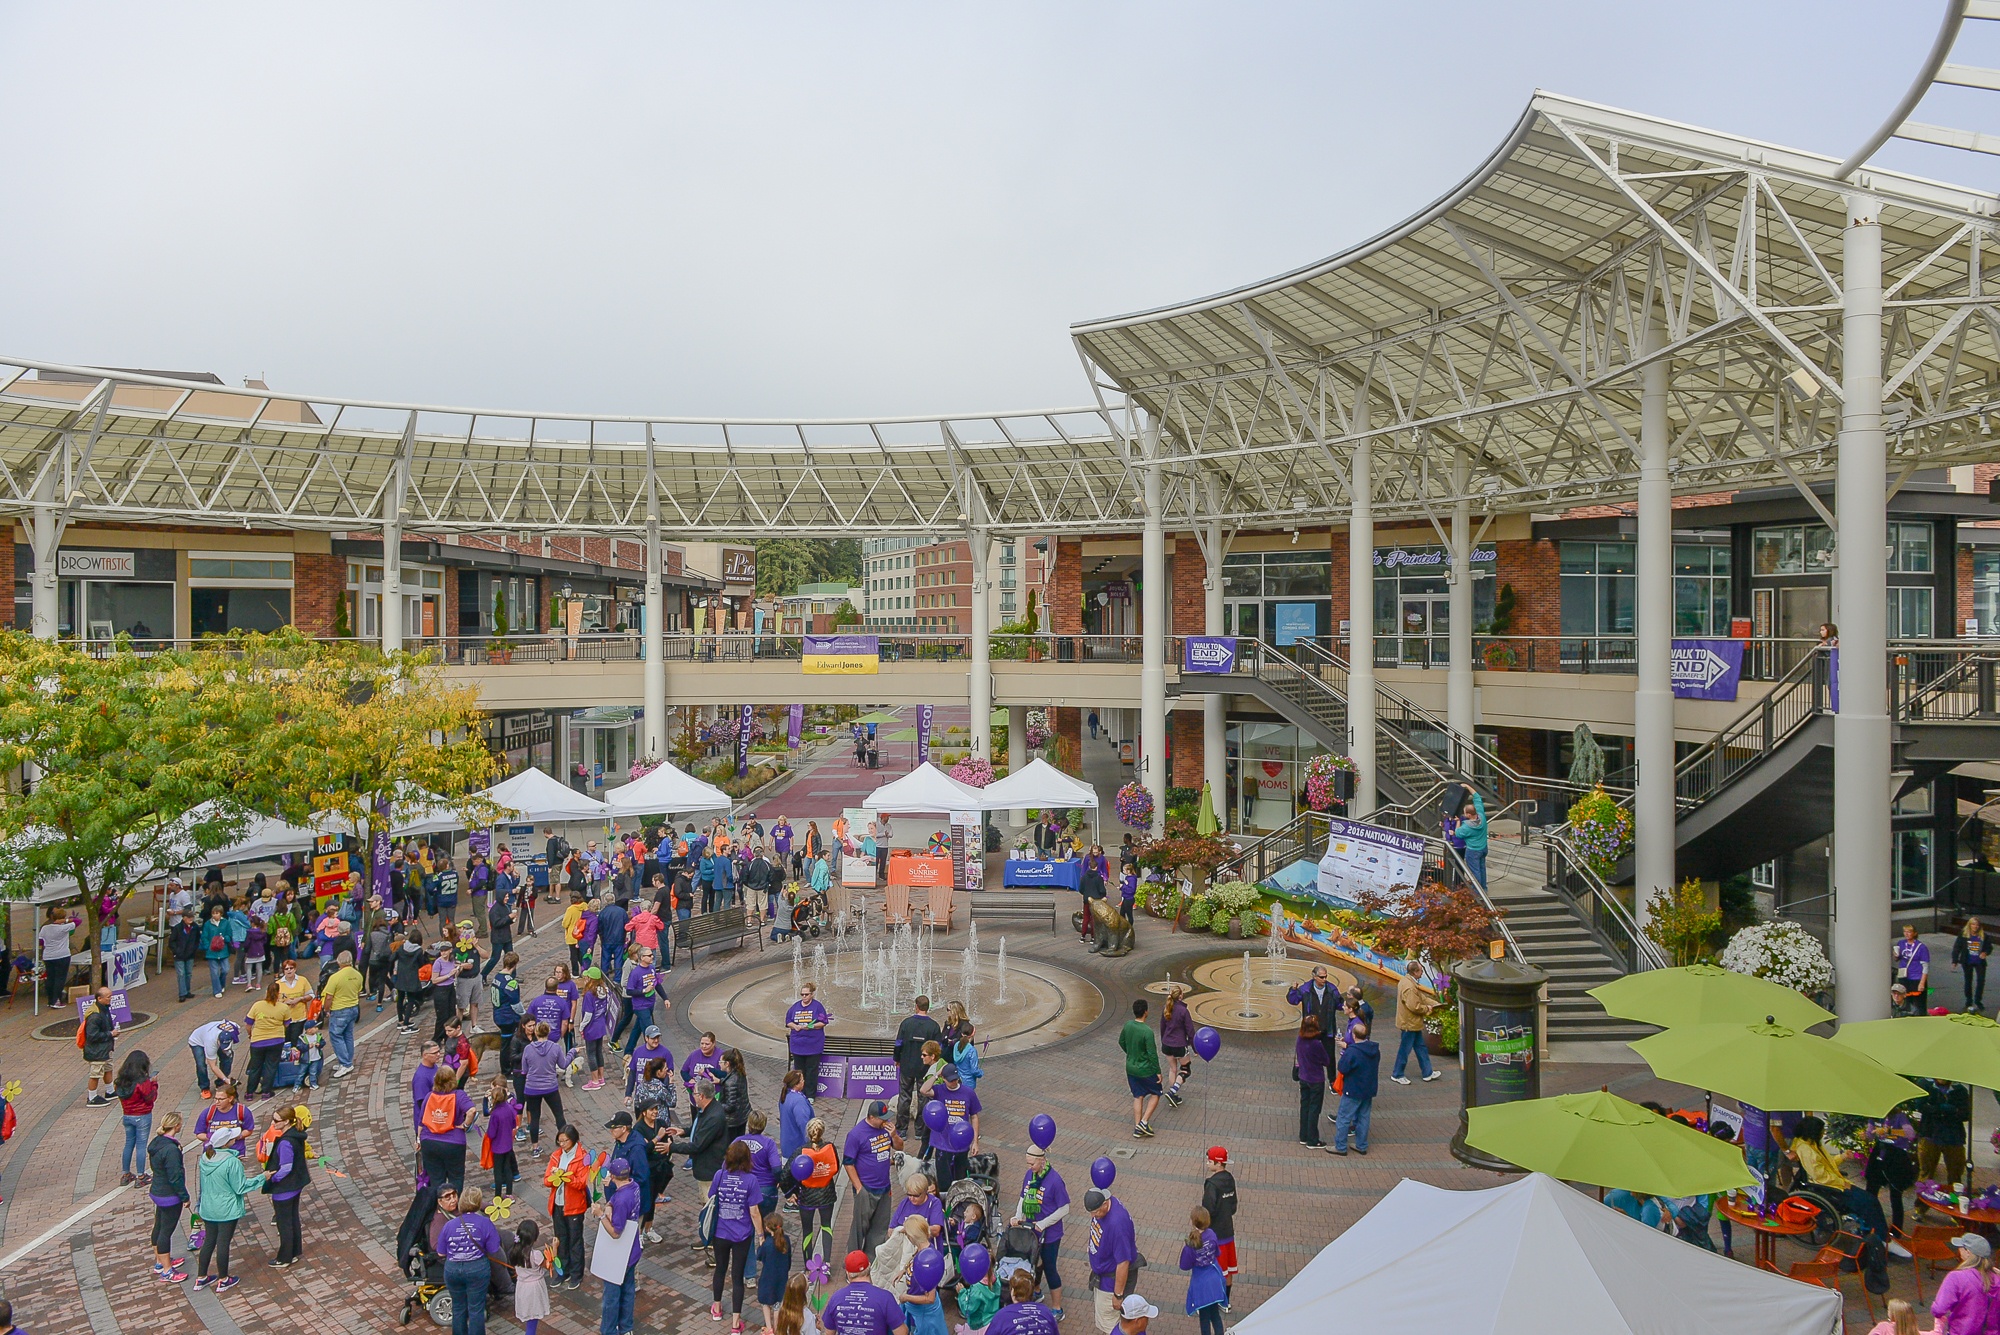 Hundreds participated in the Alzheimer’s Association’s Walk to End Alzheimer’s event at Redmond Town Center Sunday morning.